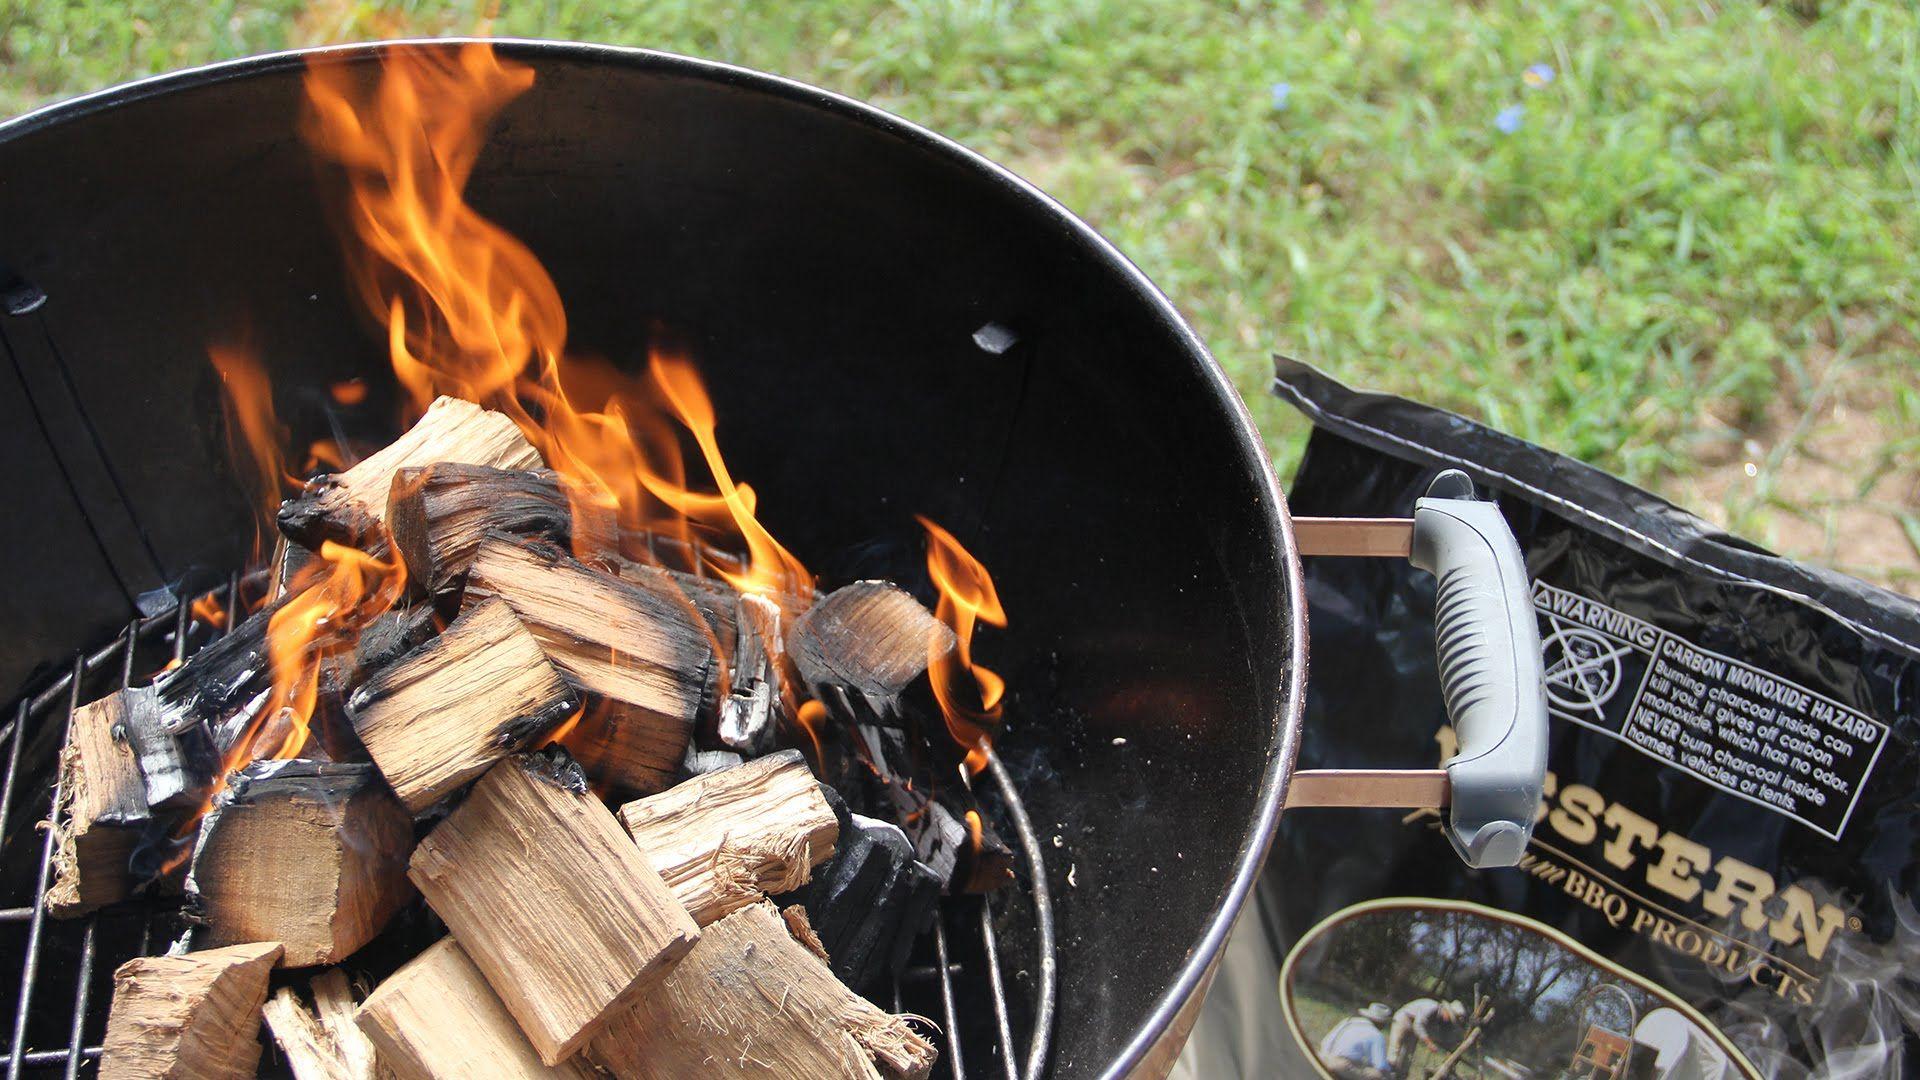 Natural Wood cooking on a Charcoal Grill